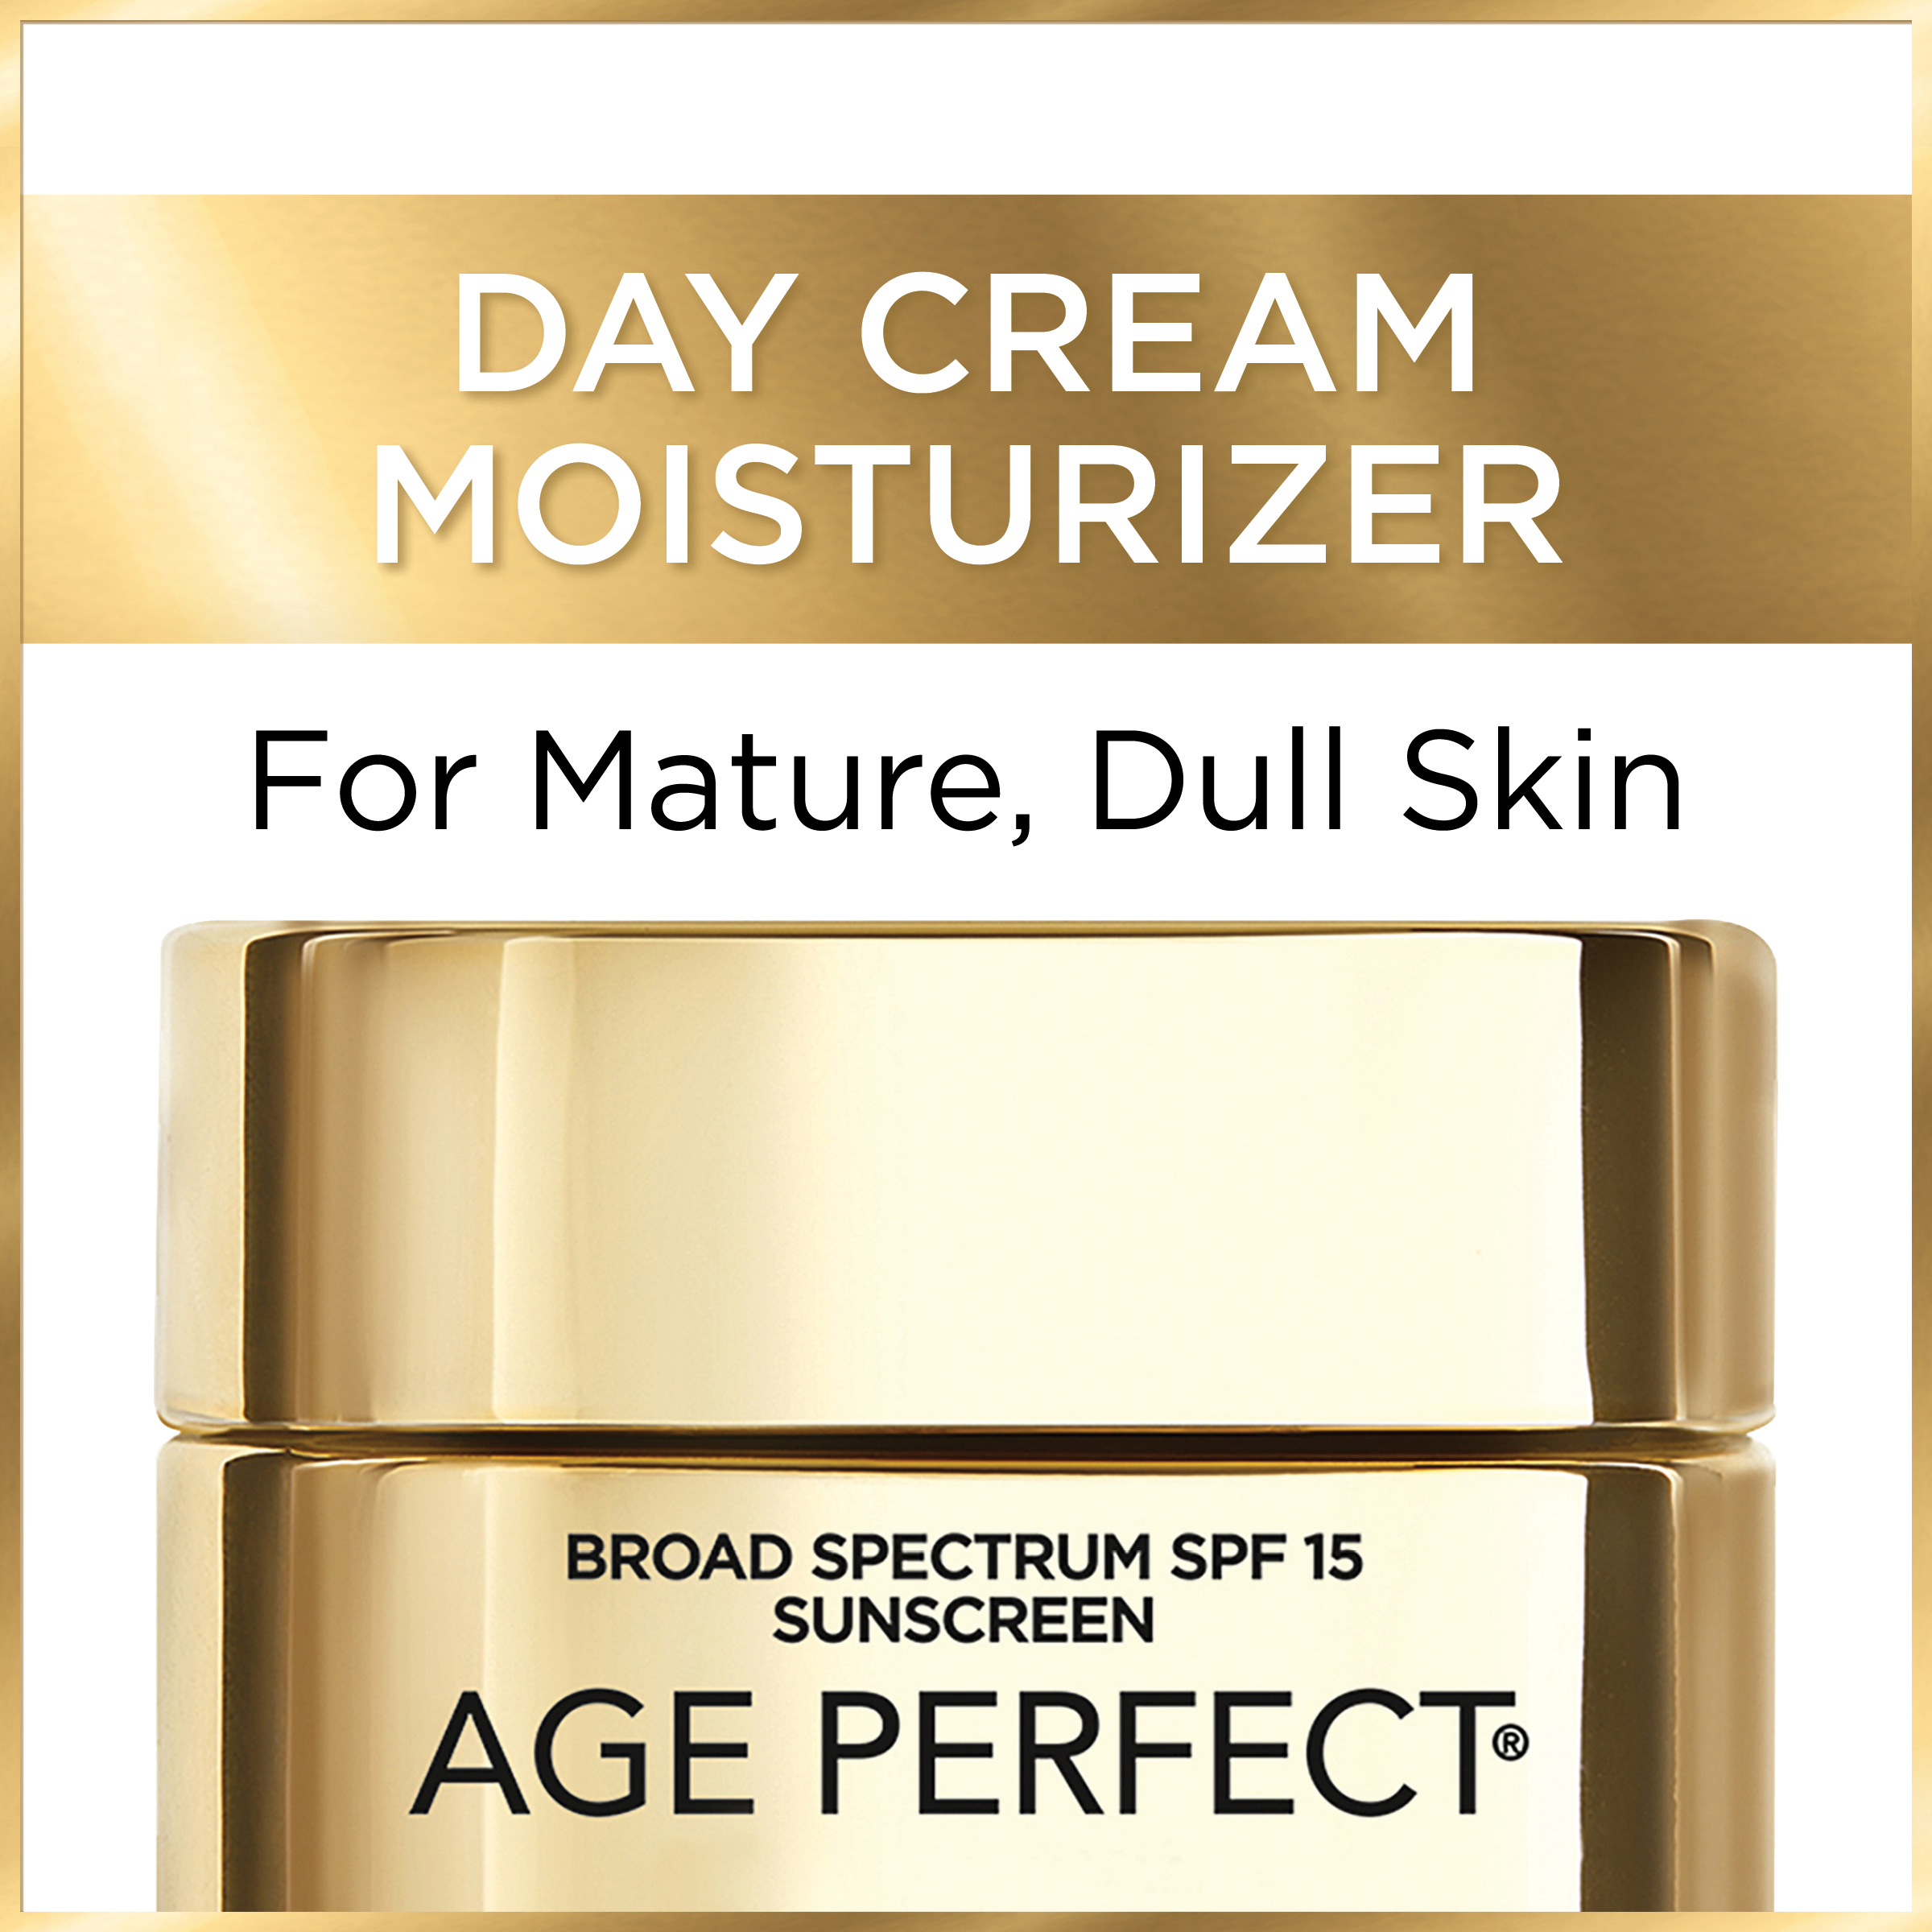 L'Oreal Paris Age Perfect Cell Renewal Day Cream Broad Spectrum SPF 15 Sunscreen, 1.7 oz - image 3 of 11